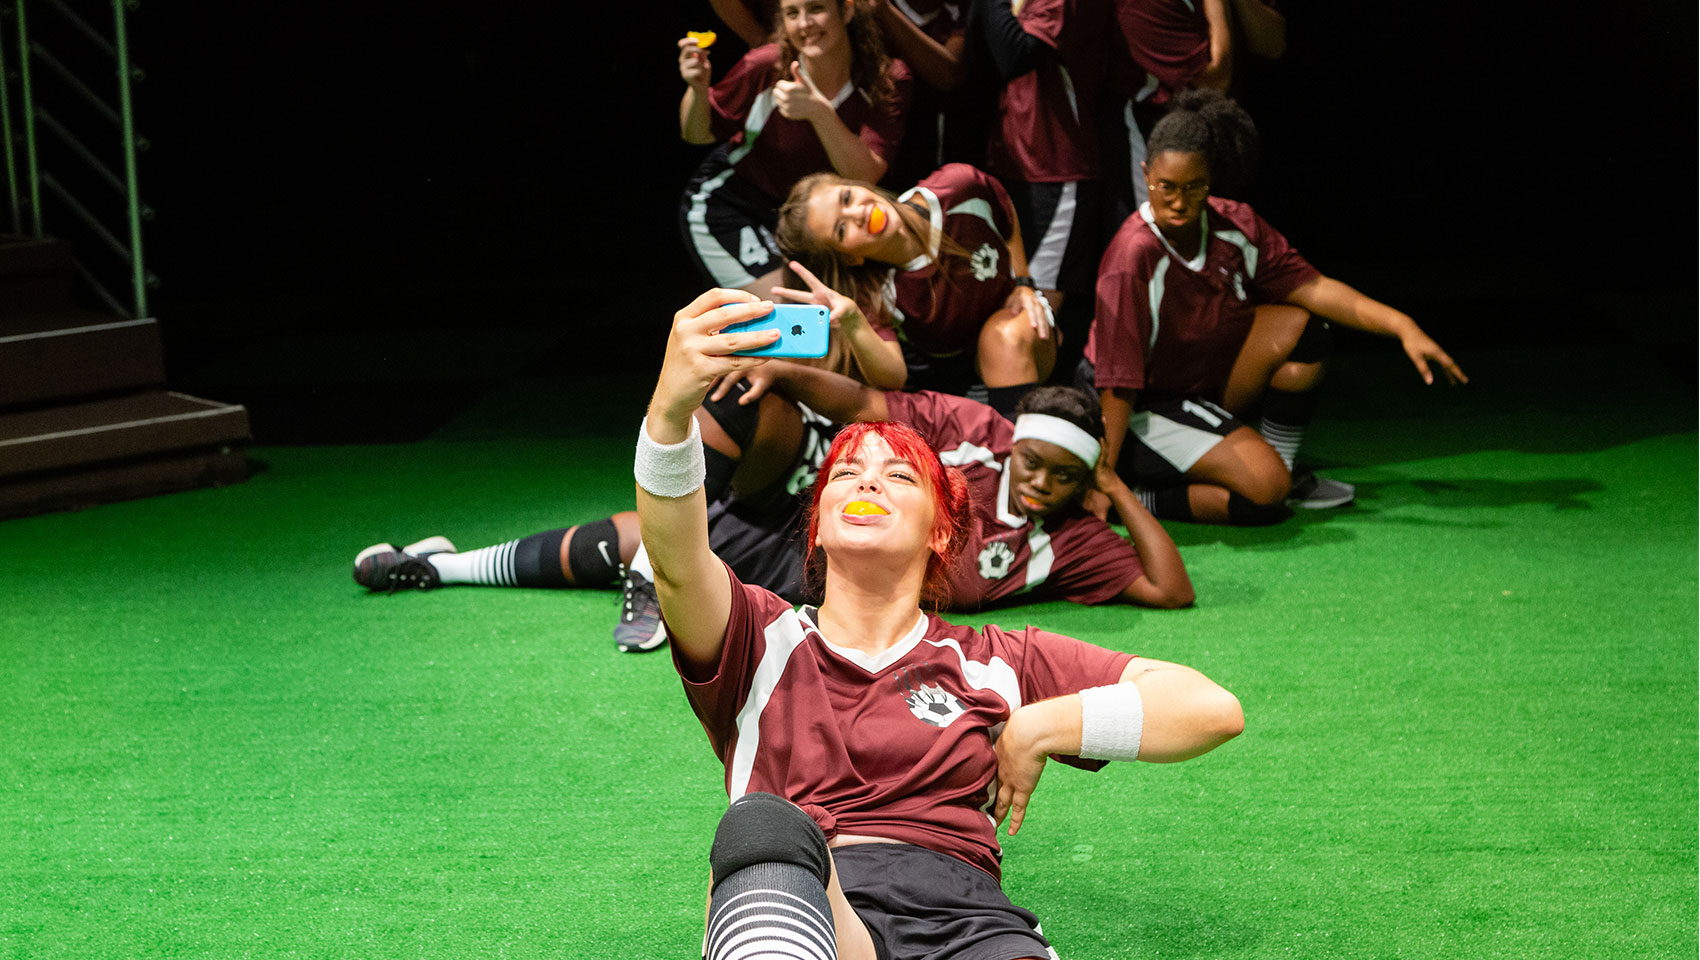 A girls' soccer team take a silly group pic together, some of them smiling with orange peels covering their teeth.